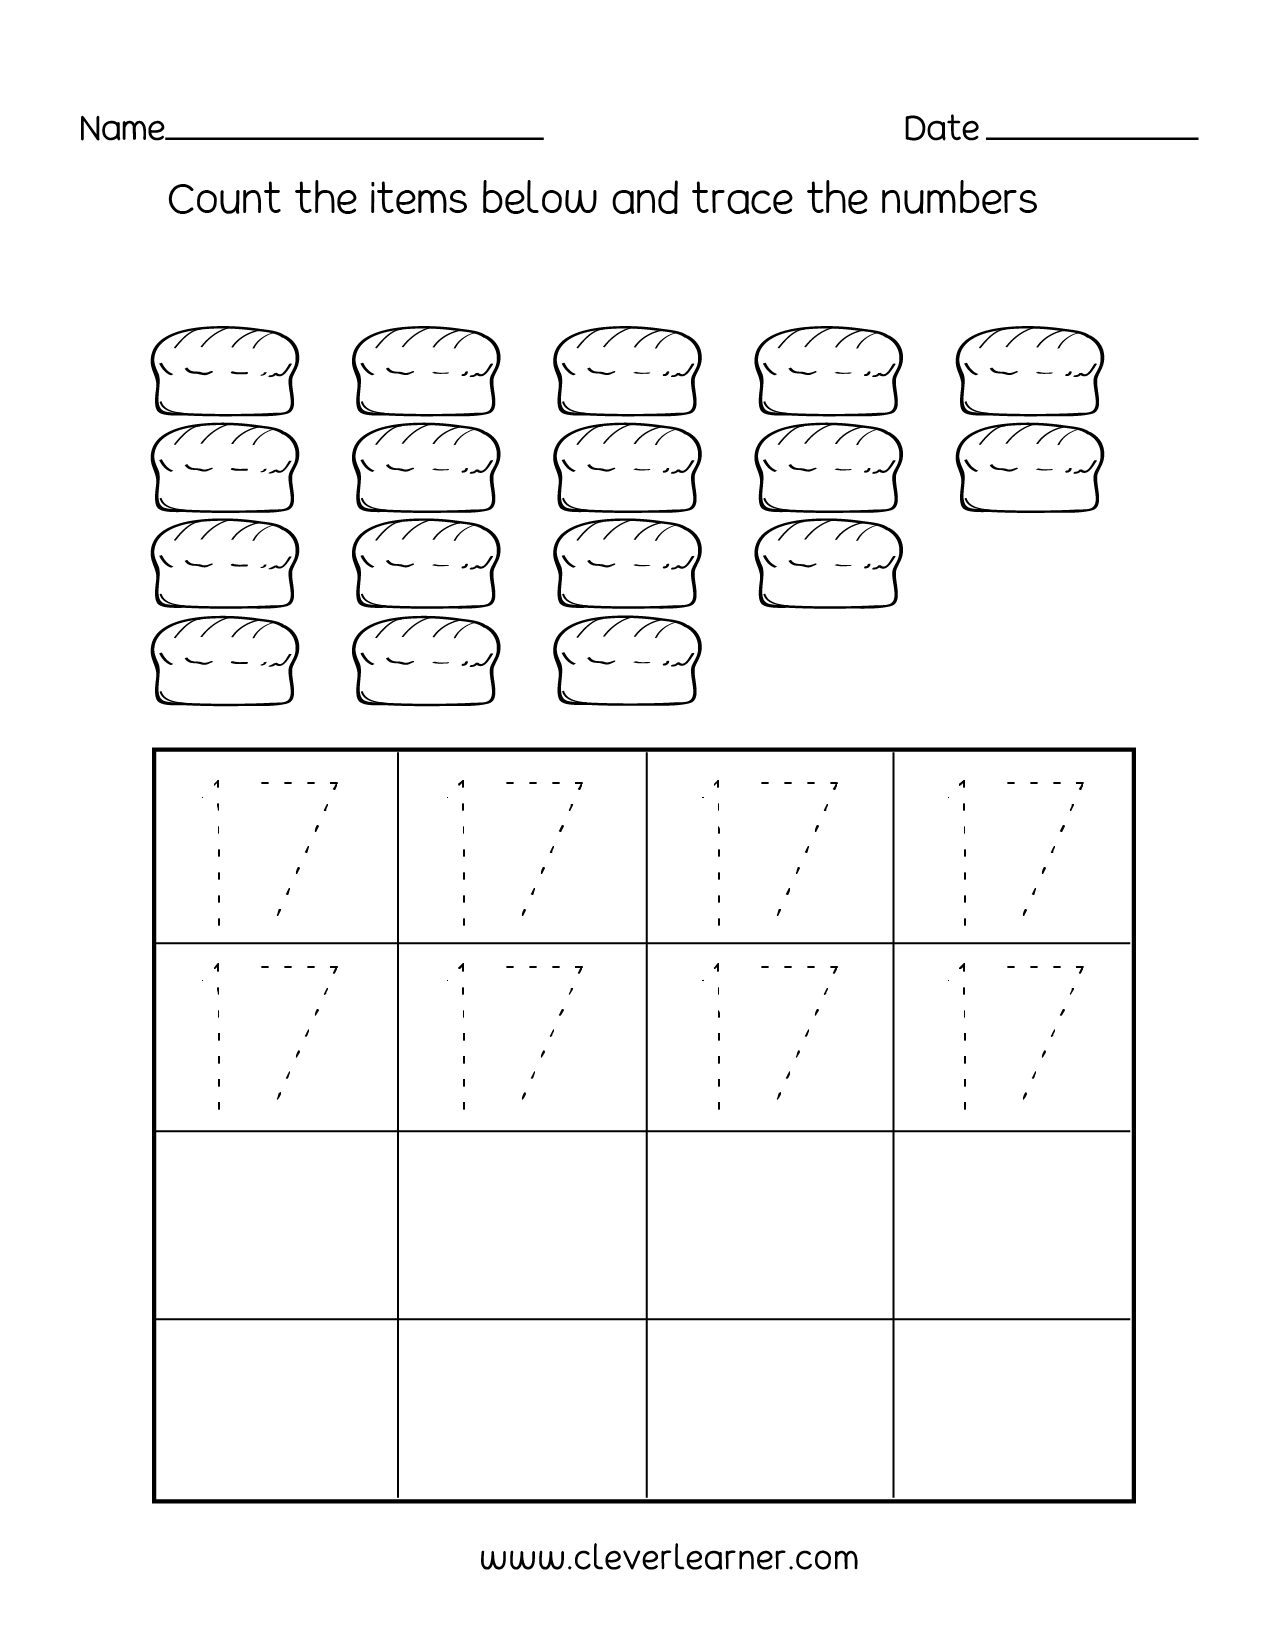 number-17-writing-counting-and-identification-printable-worksheets-for-children